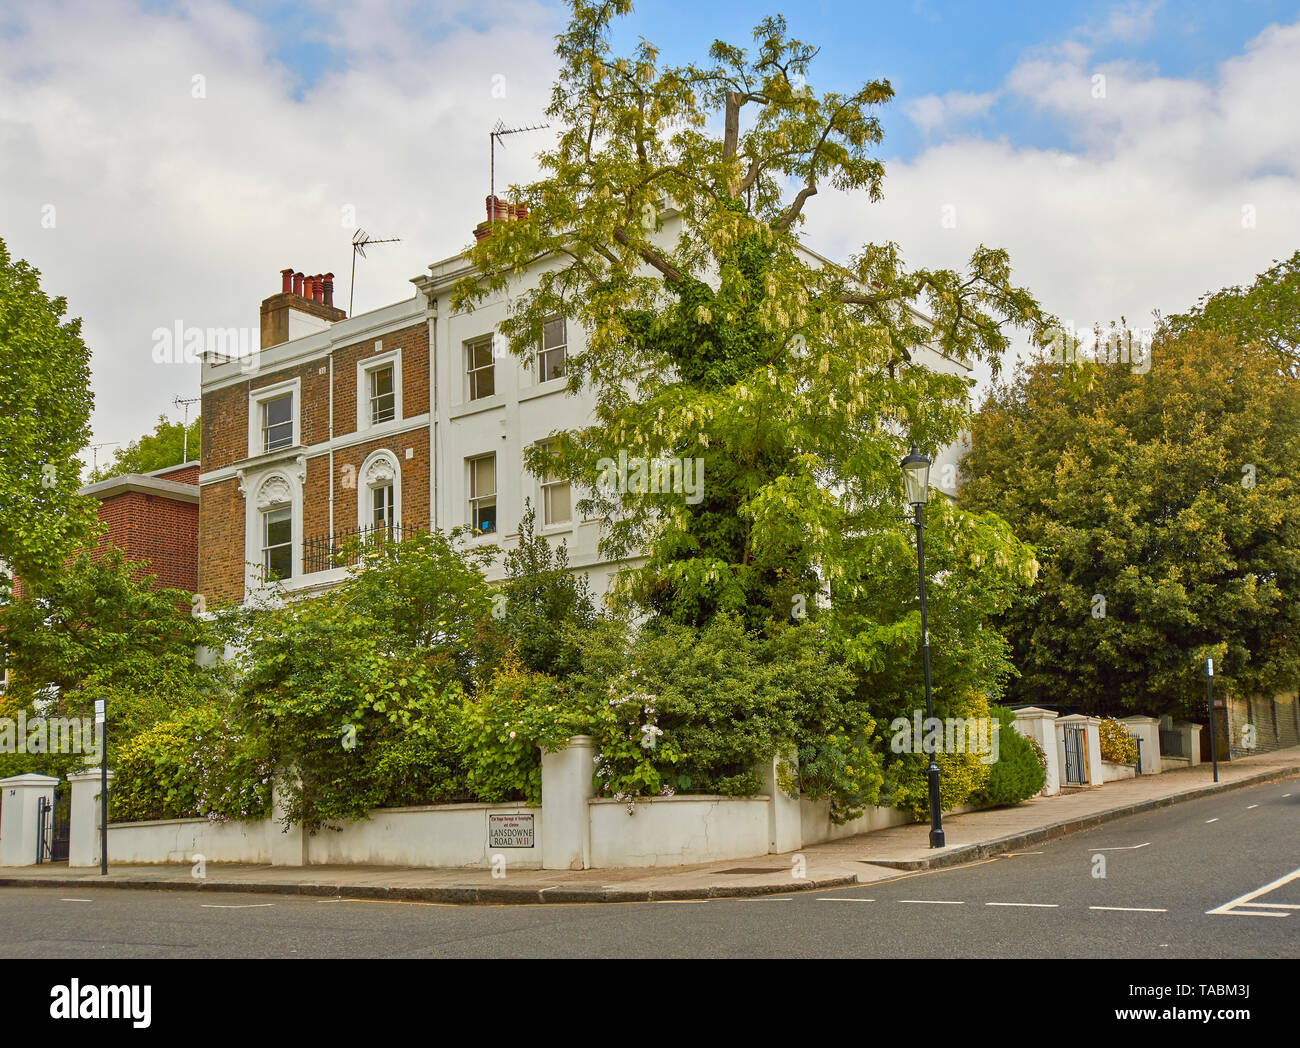 LONDON NOTTING HILL HOUSE AND GARDEN IN LANSDOWNE ROAD WITH BEAUTIFUL ACACIA TREE COVERED WITH WHITE FLOWERS Stock Photo